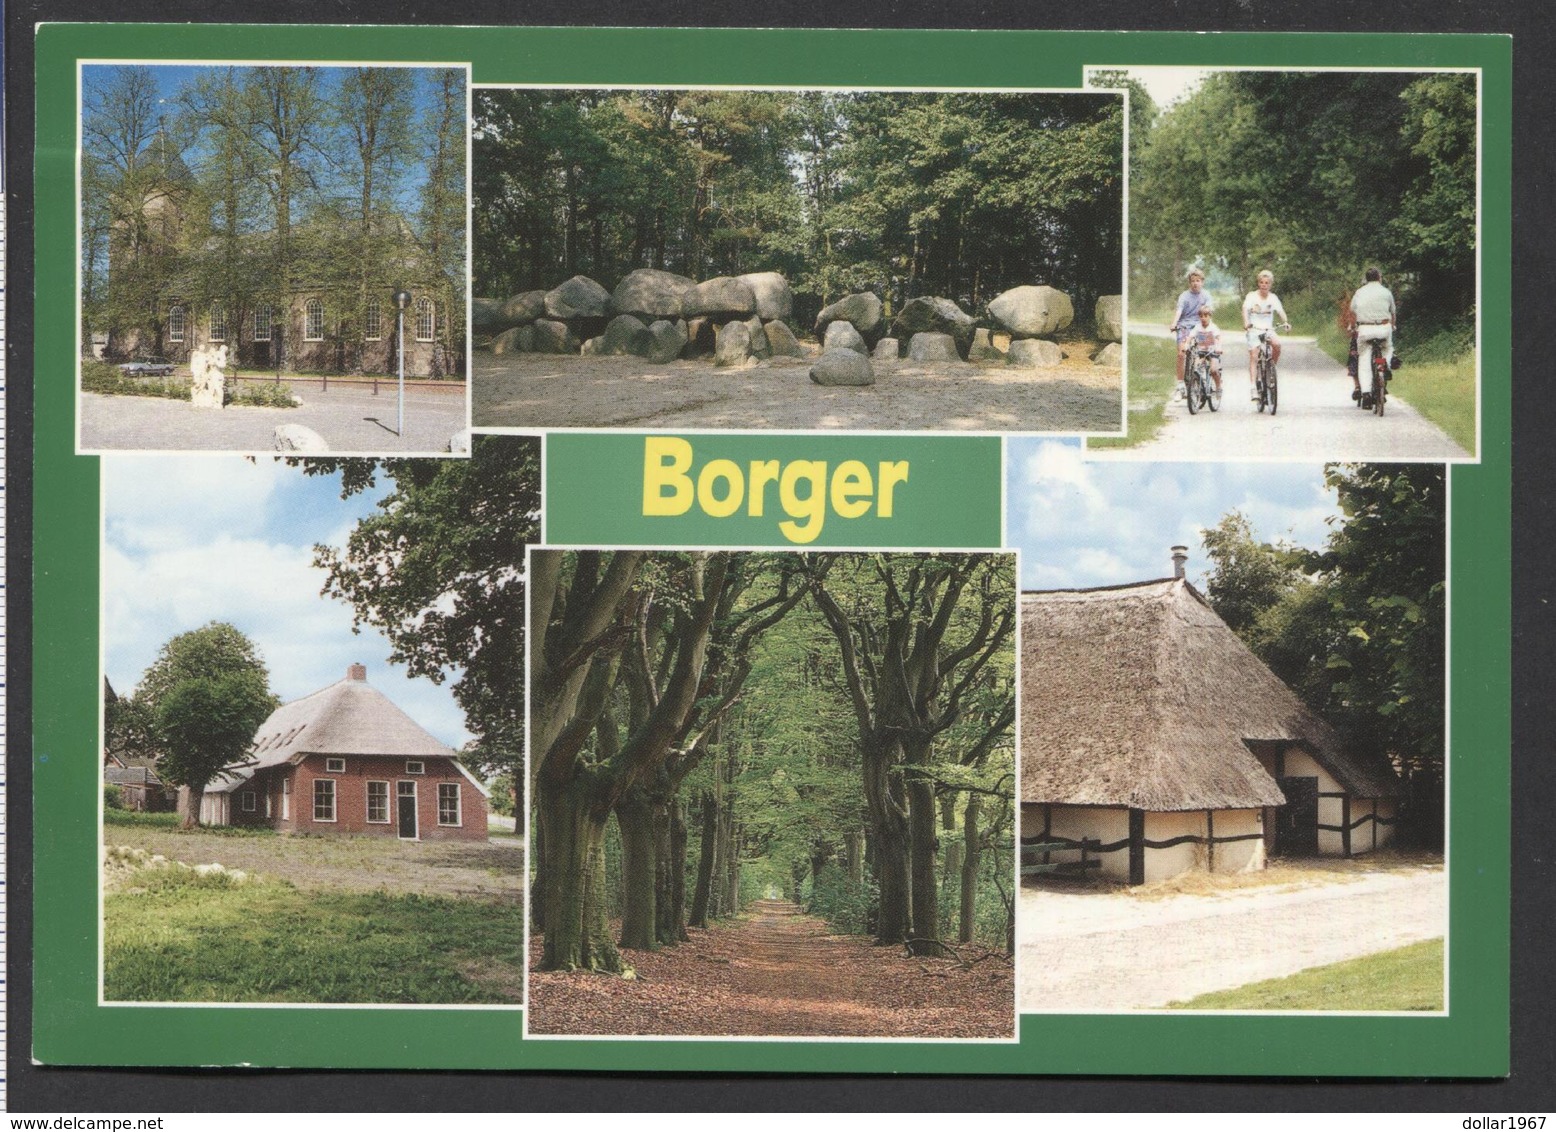 Borger - Gemeente Borger-Odoorn. - NOT  Used - See The 2 Scans For Condition.(Originalscan ) - Odoorn